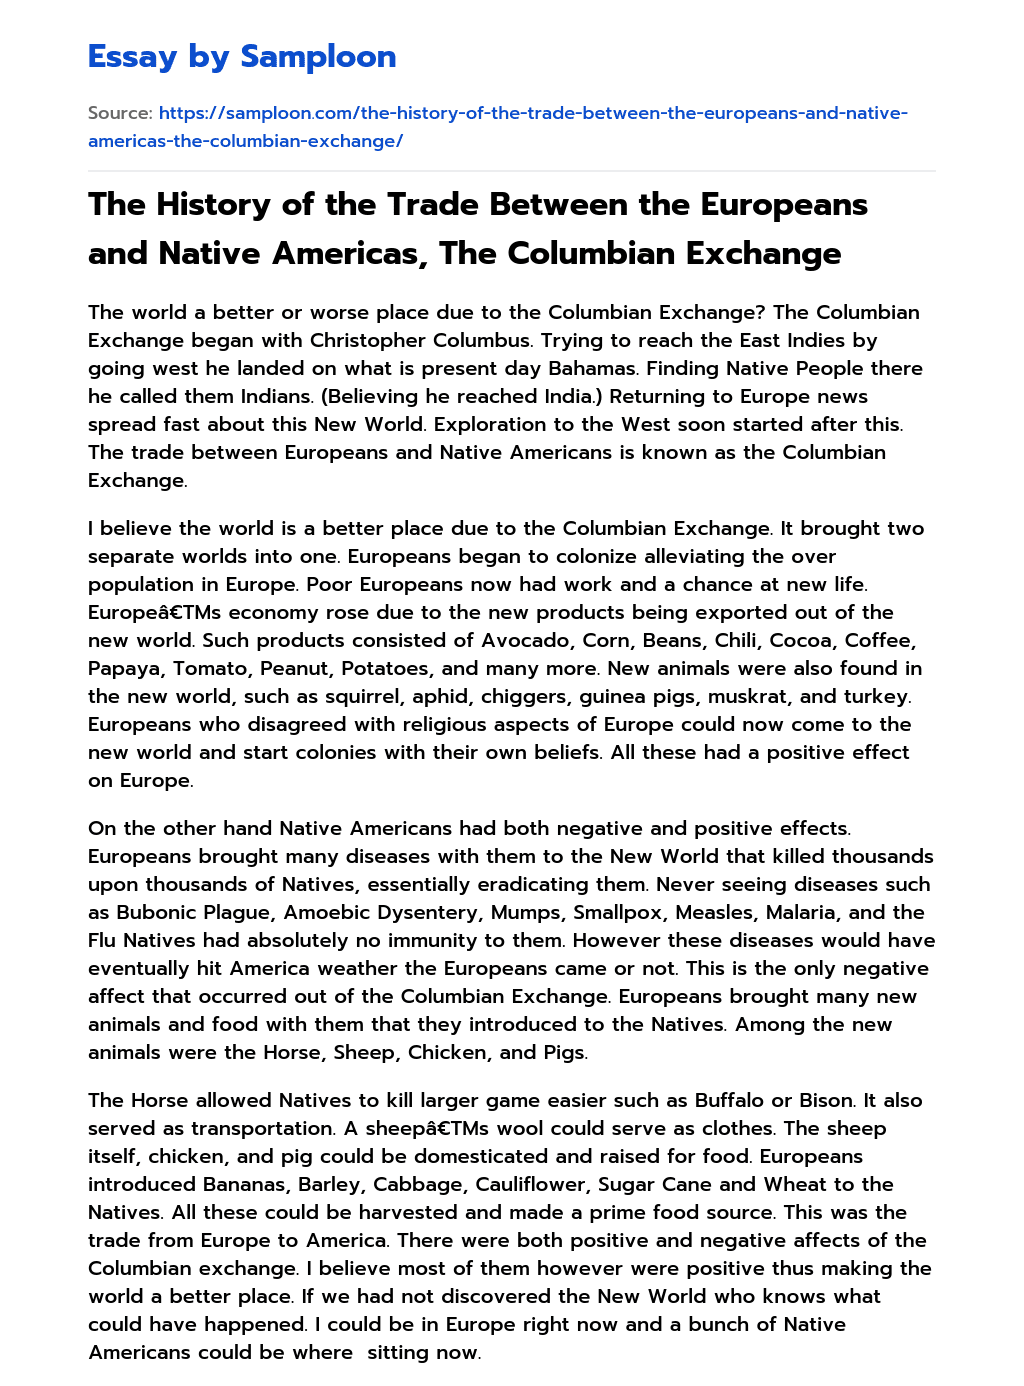 The History of the Trade Between the Europeans and Native Americas, The Columbian Exchange essay